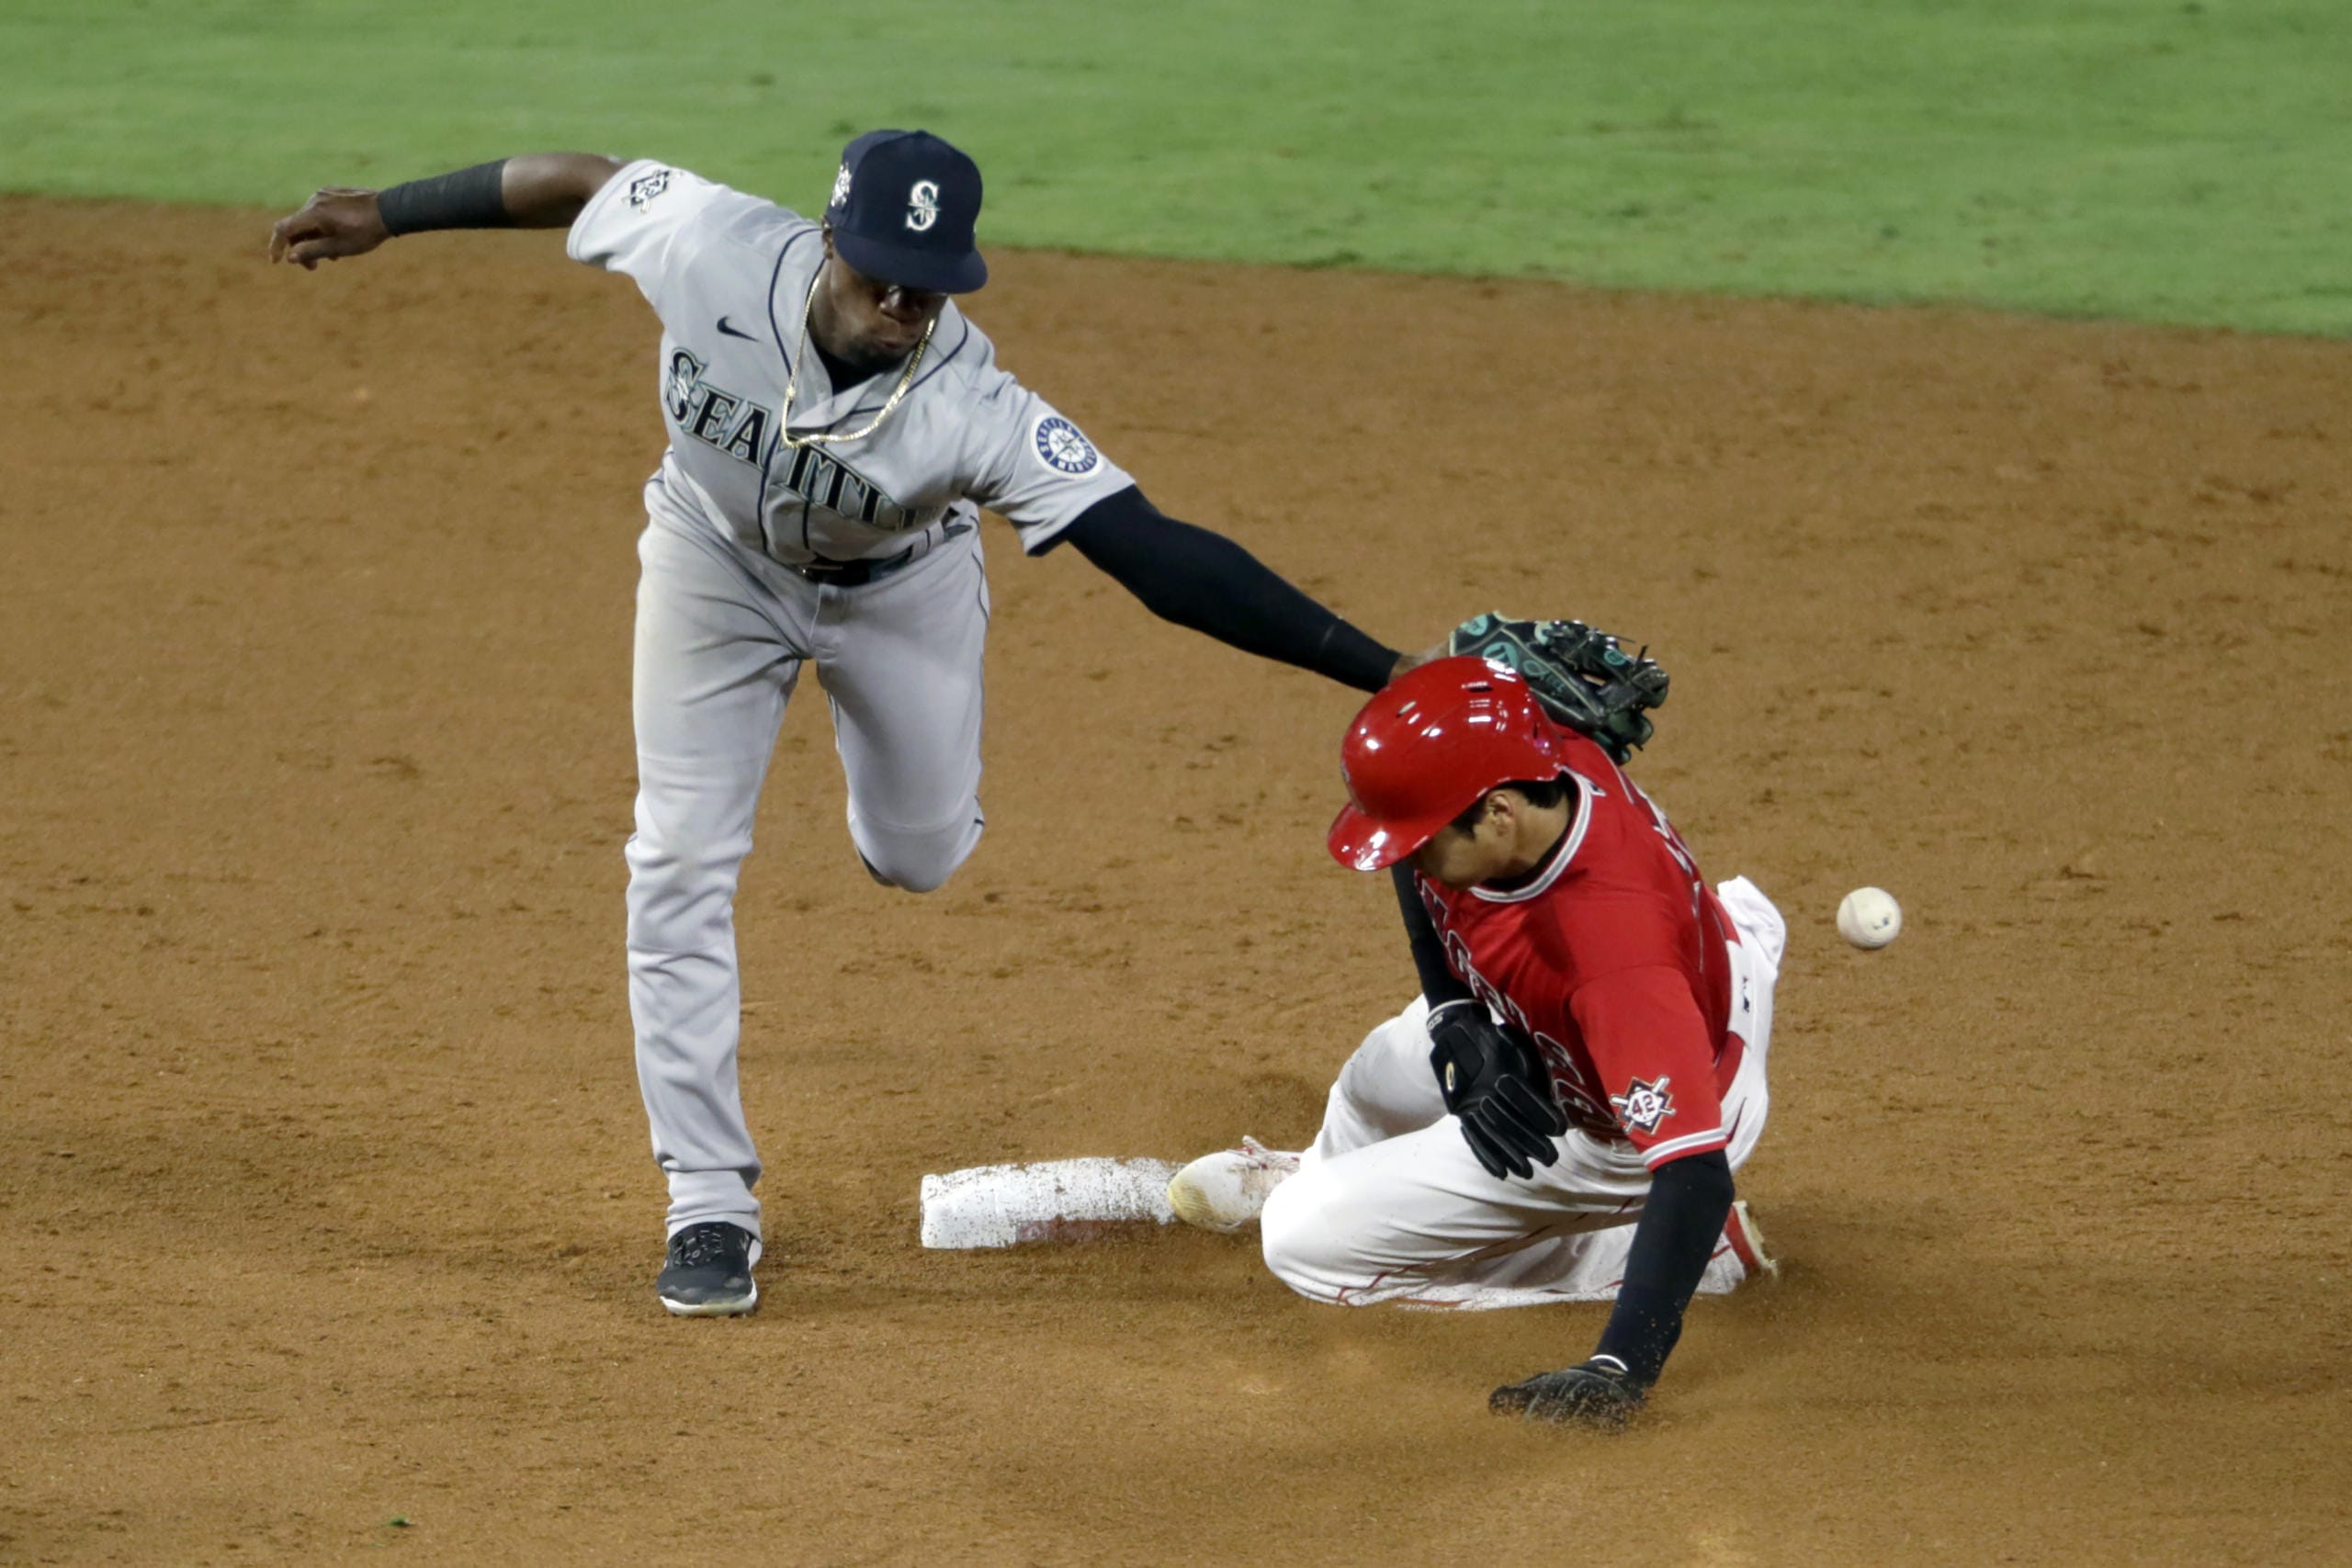 Seattle Mariners second baseman Shed Long Jr., left, misses the ball as Los Angeles Angels' Shohei Ohtani steals second base during the sixth inning of a baseball game in Anaheim, Calif., Friday, Aug. 28, 2020.